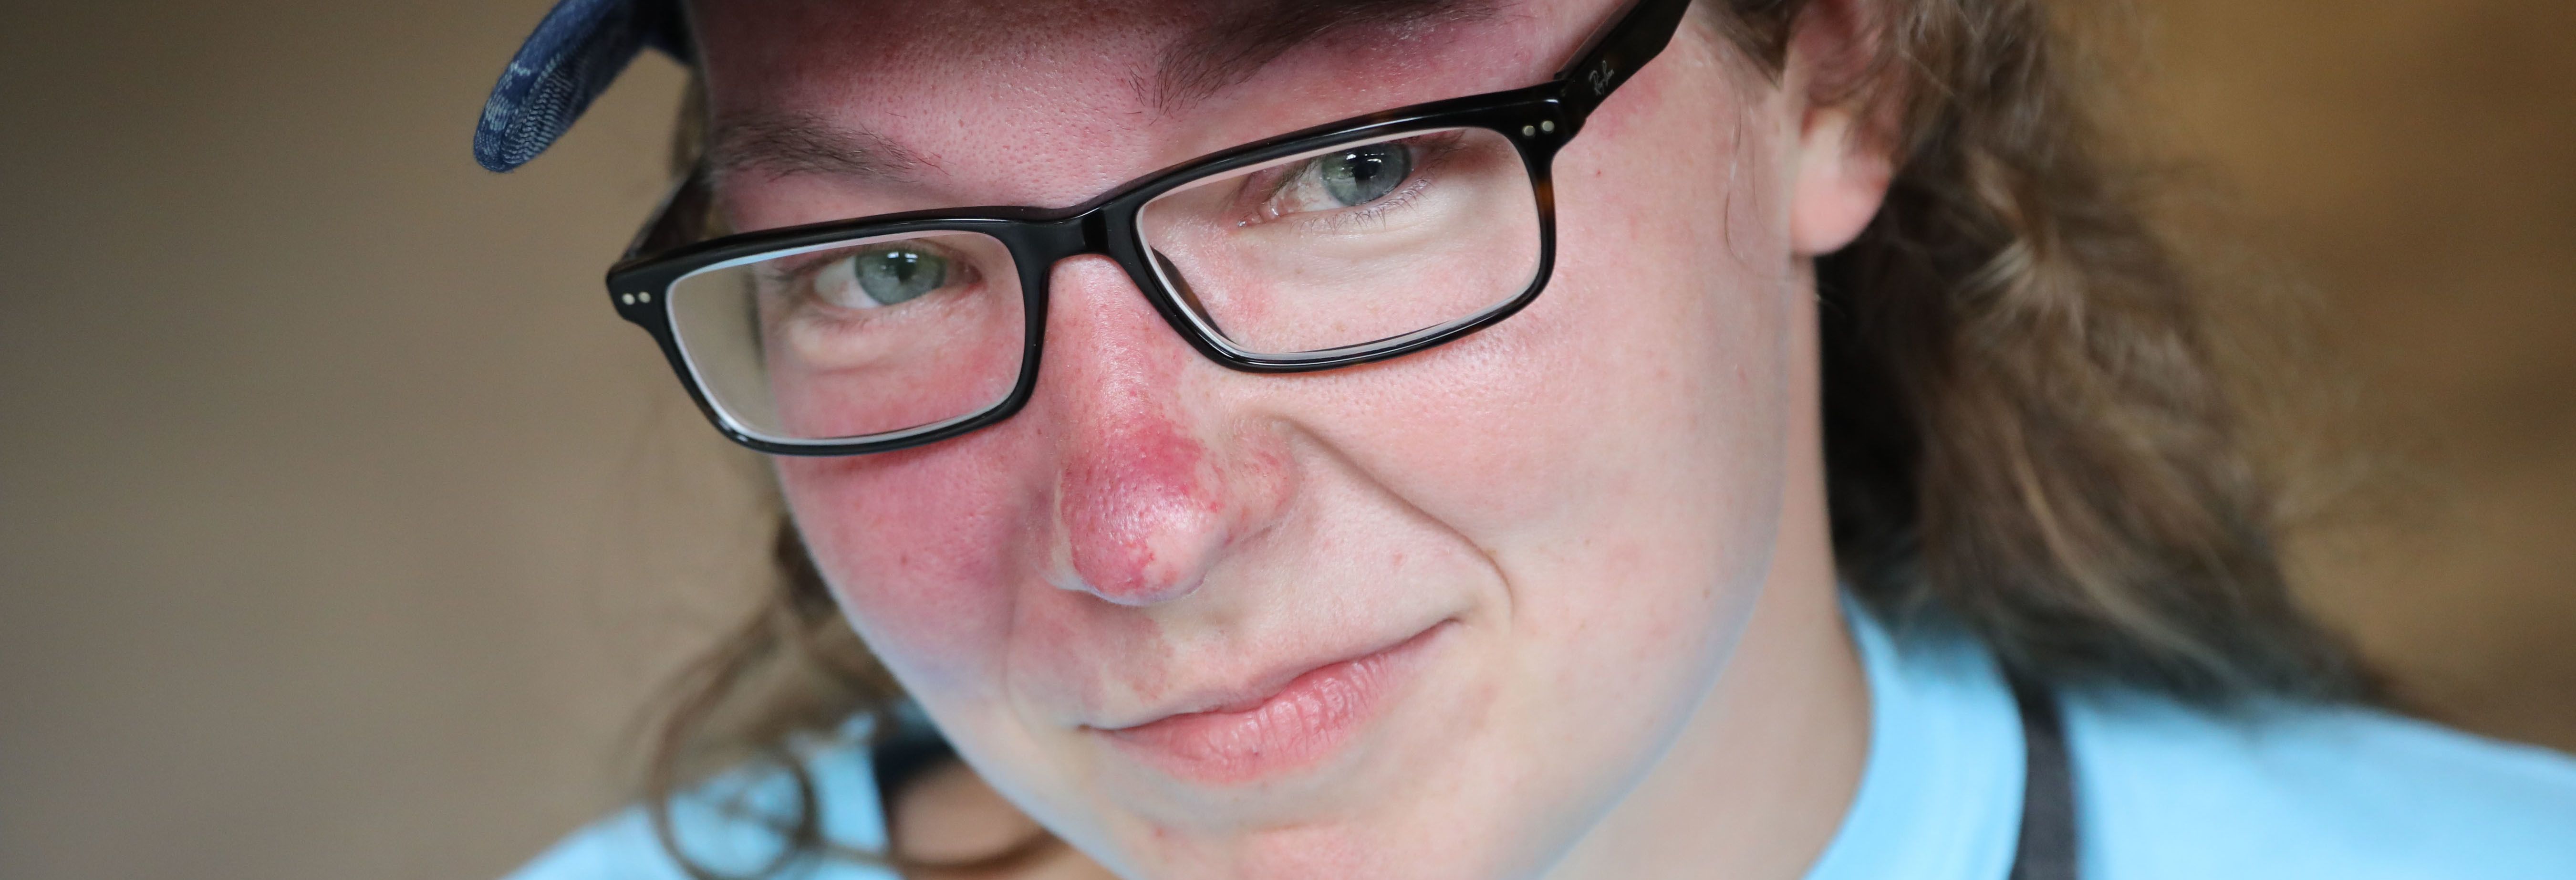 Close up of young woman in glasses and ball cap with facial birthmark